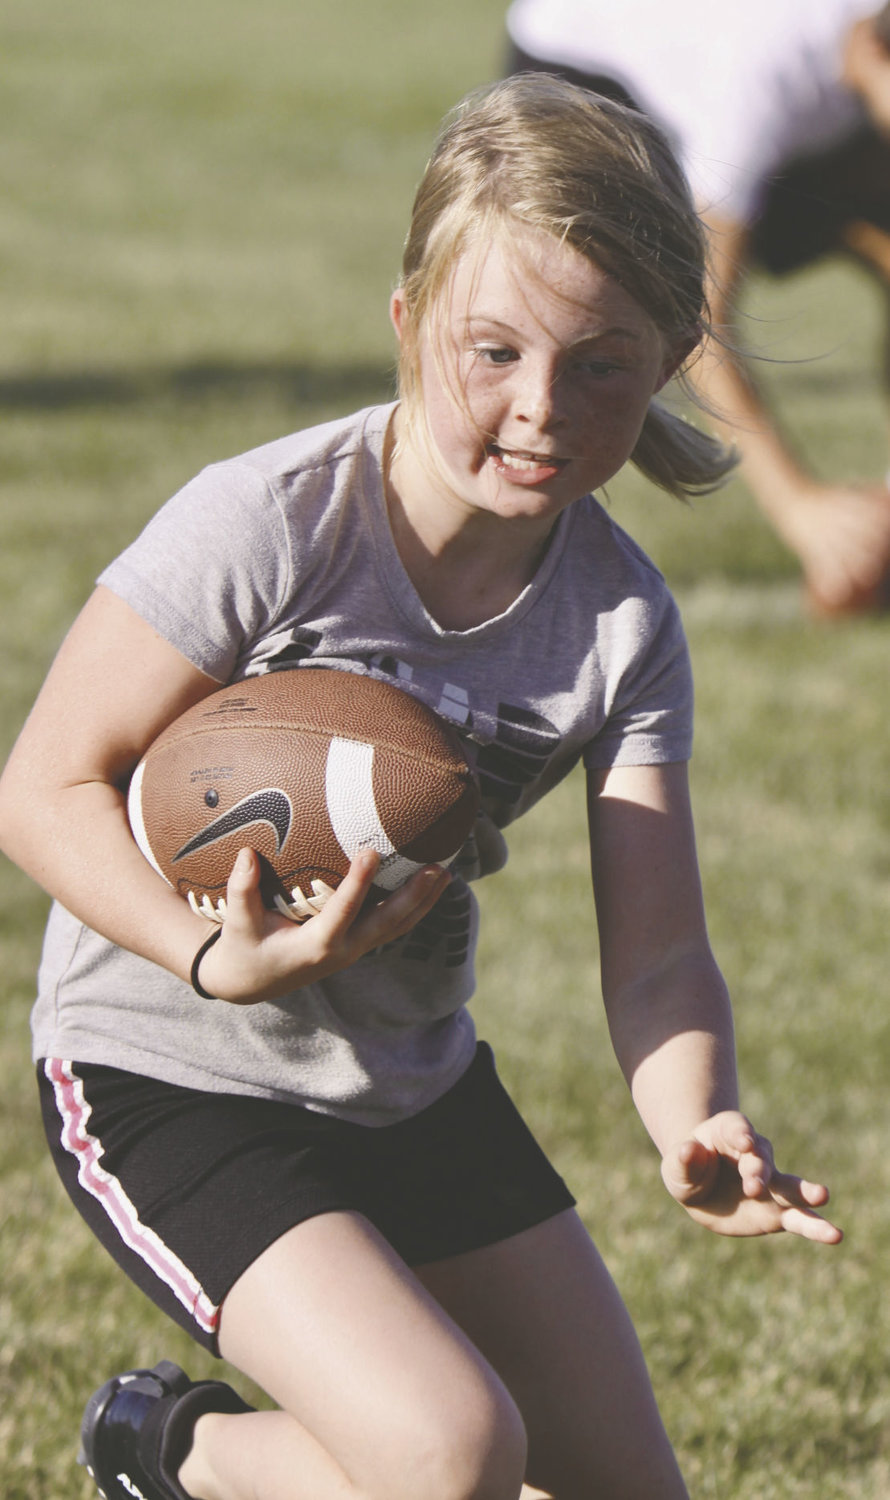 Ava Kincade was showing off her power as she catches the ball during the Charger football camp.